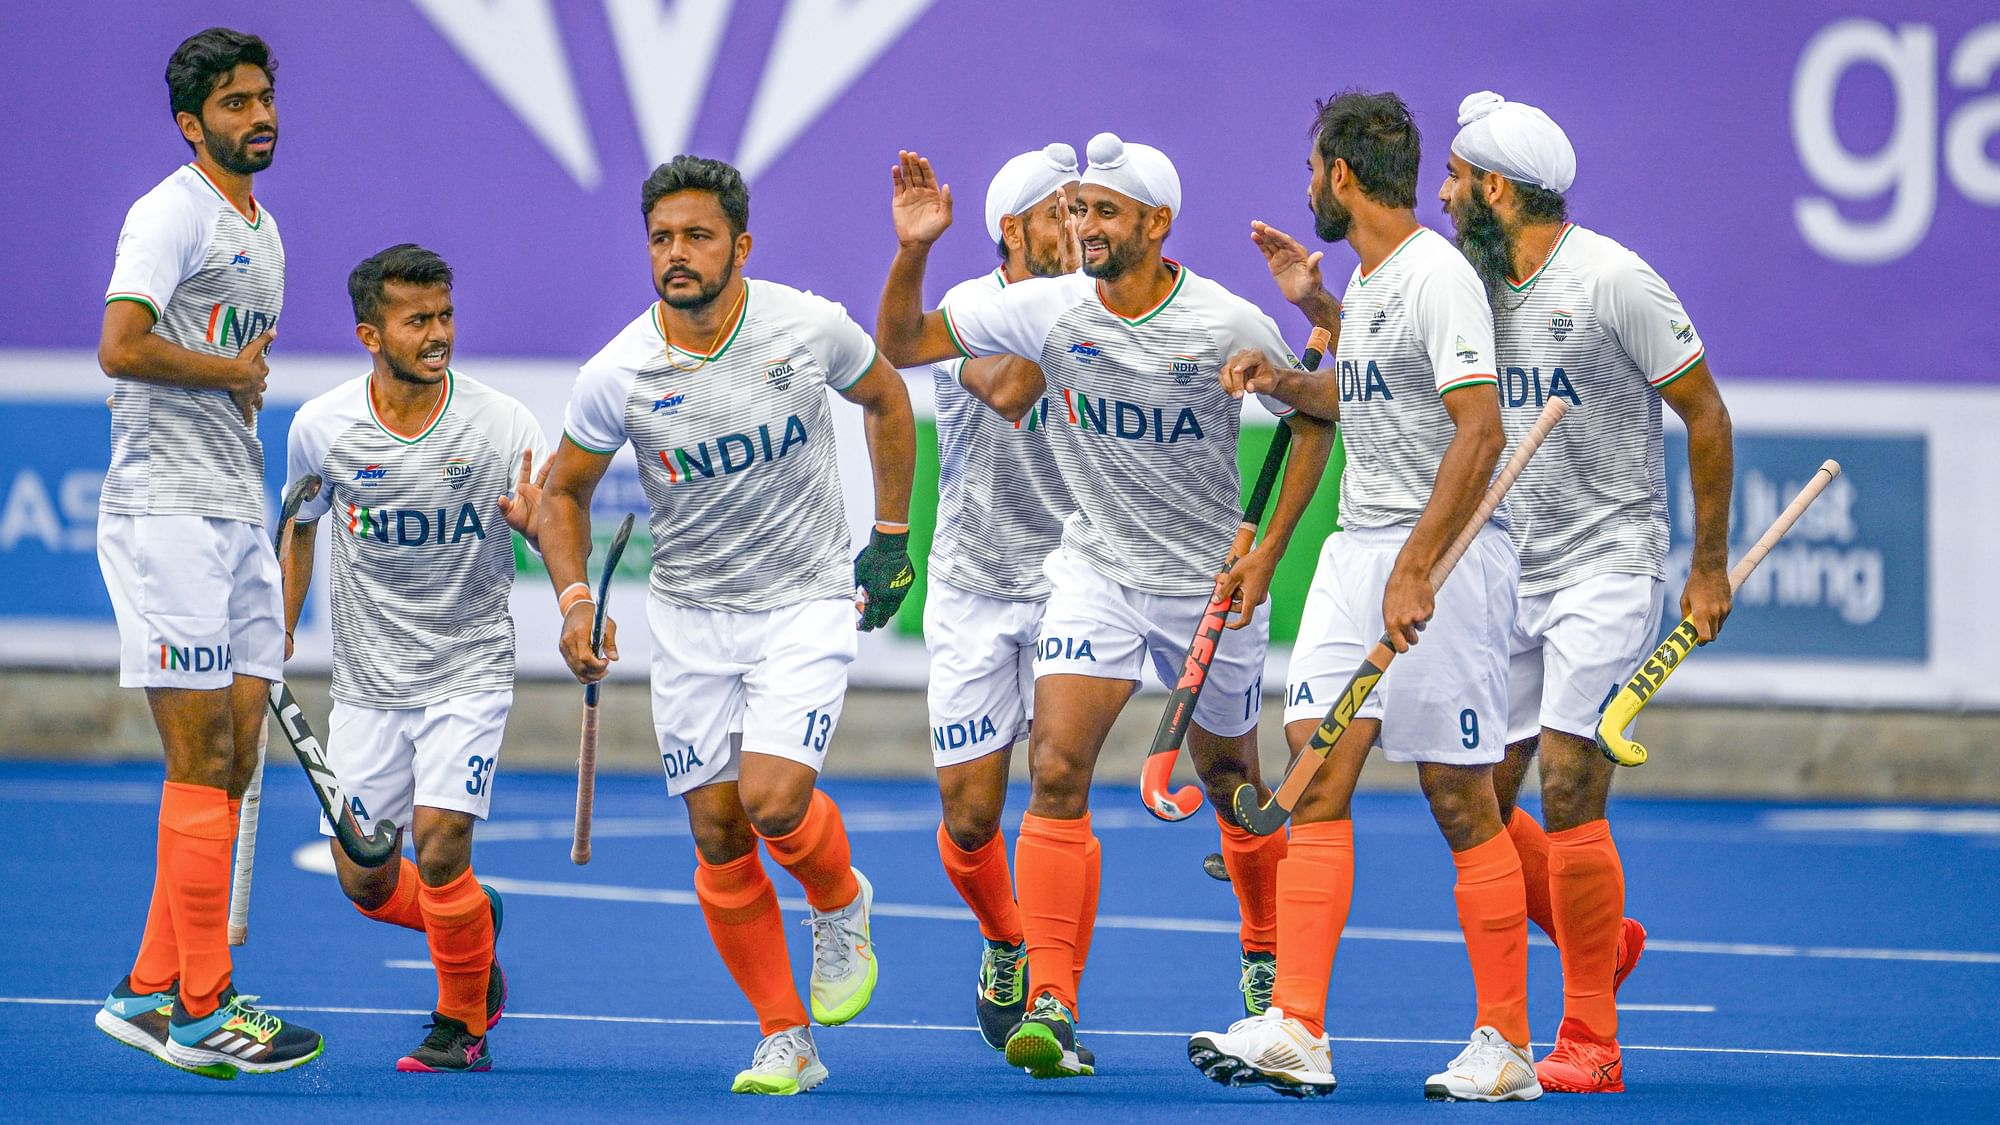 <div class="paragraphs"><p>Indian hockey players celebrate after scoring a goal against Wales during the Pool B men's field hockey match of the 2022 Commonwealth Games in Birmingham.&nbsp;</p></div>